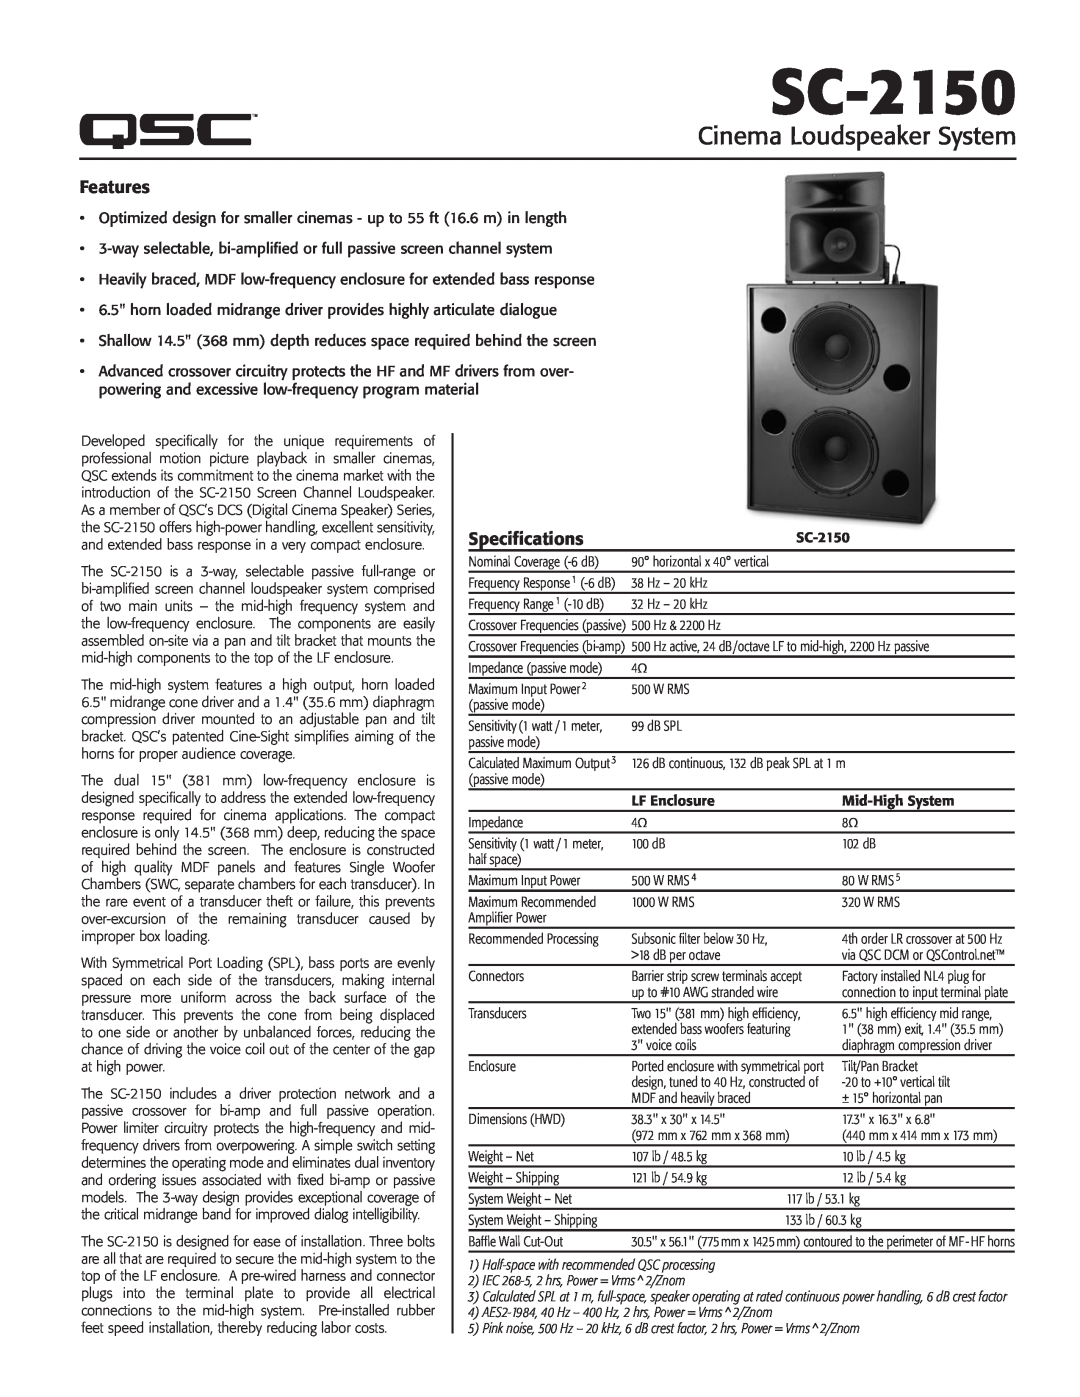 QSC Audio SC-2150 specifications Features, Specifications, Cinema Loudspeaker System 